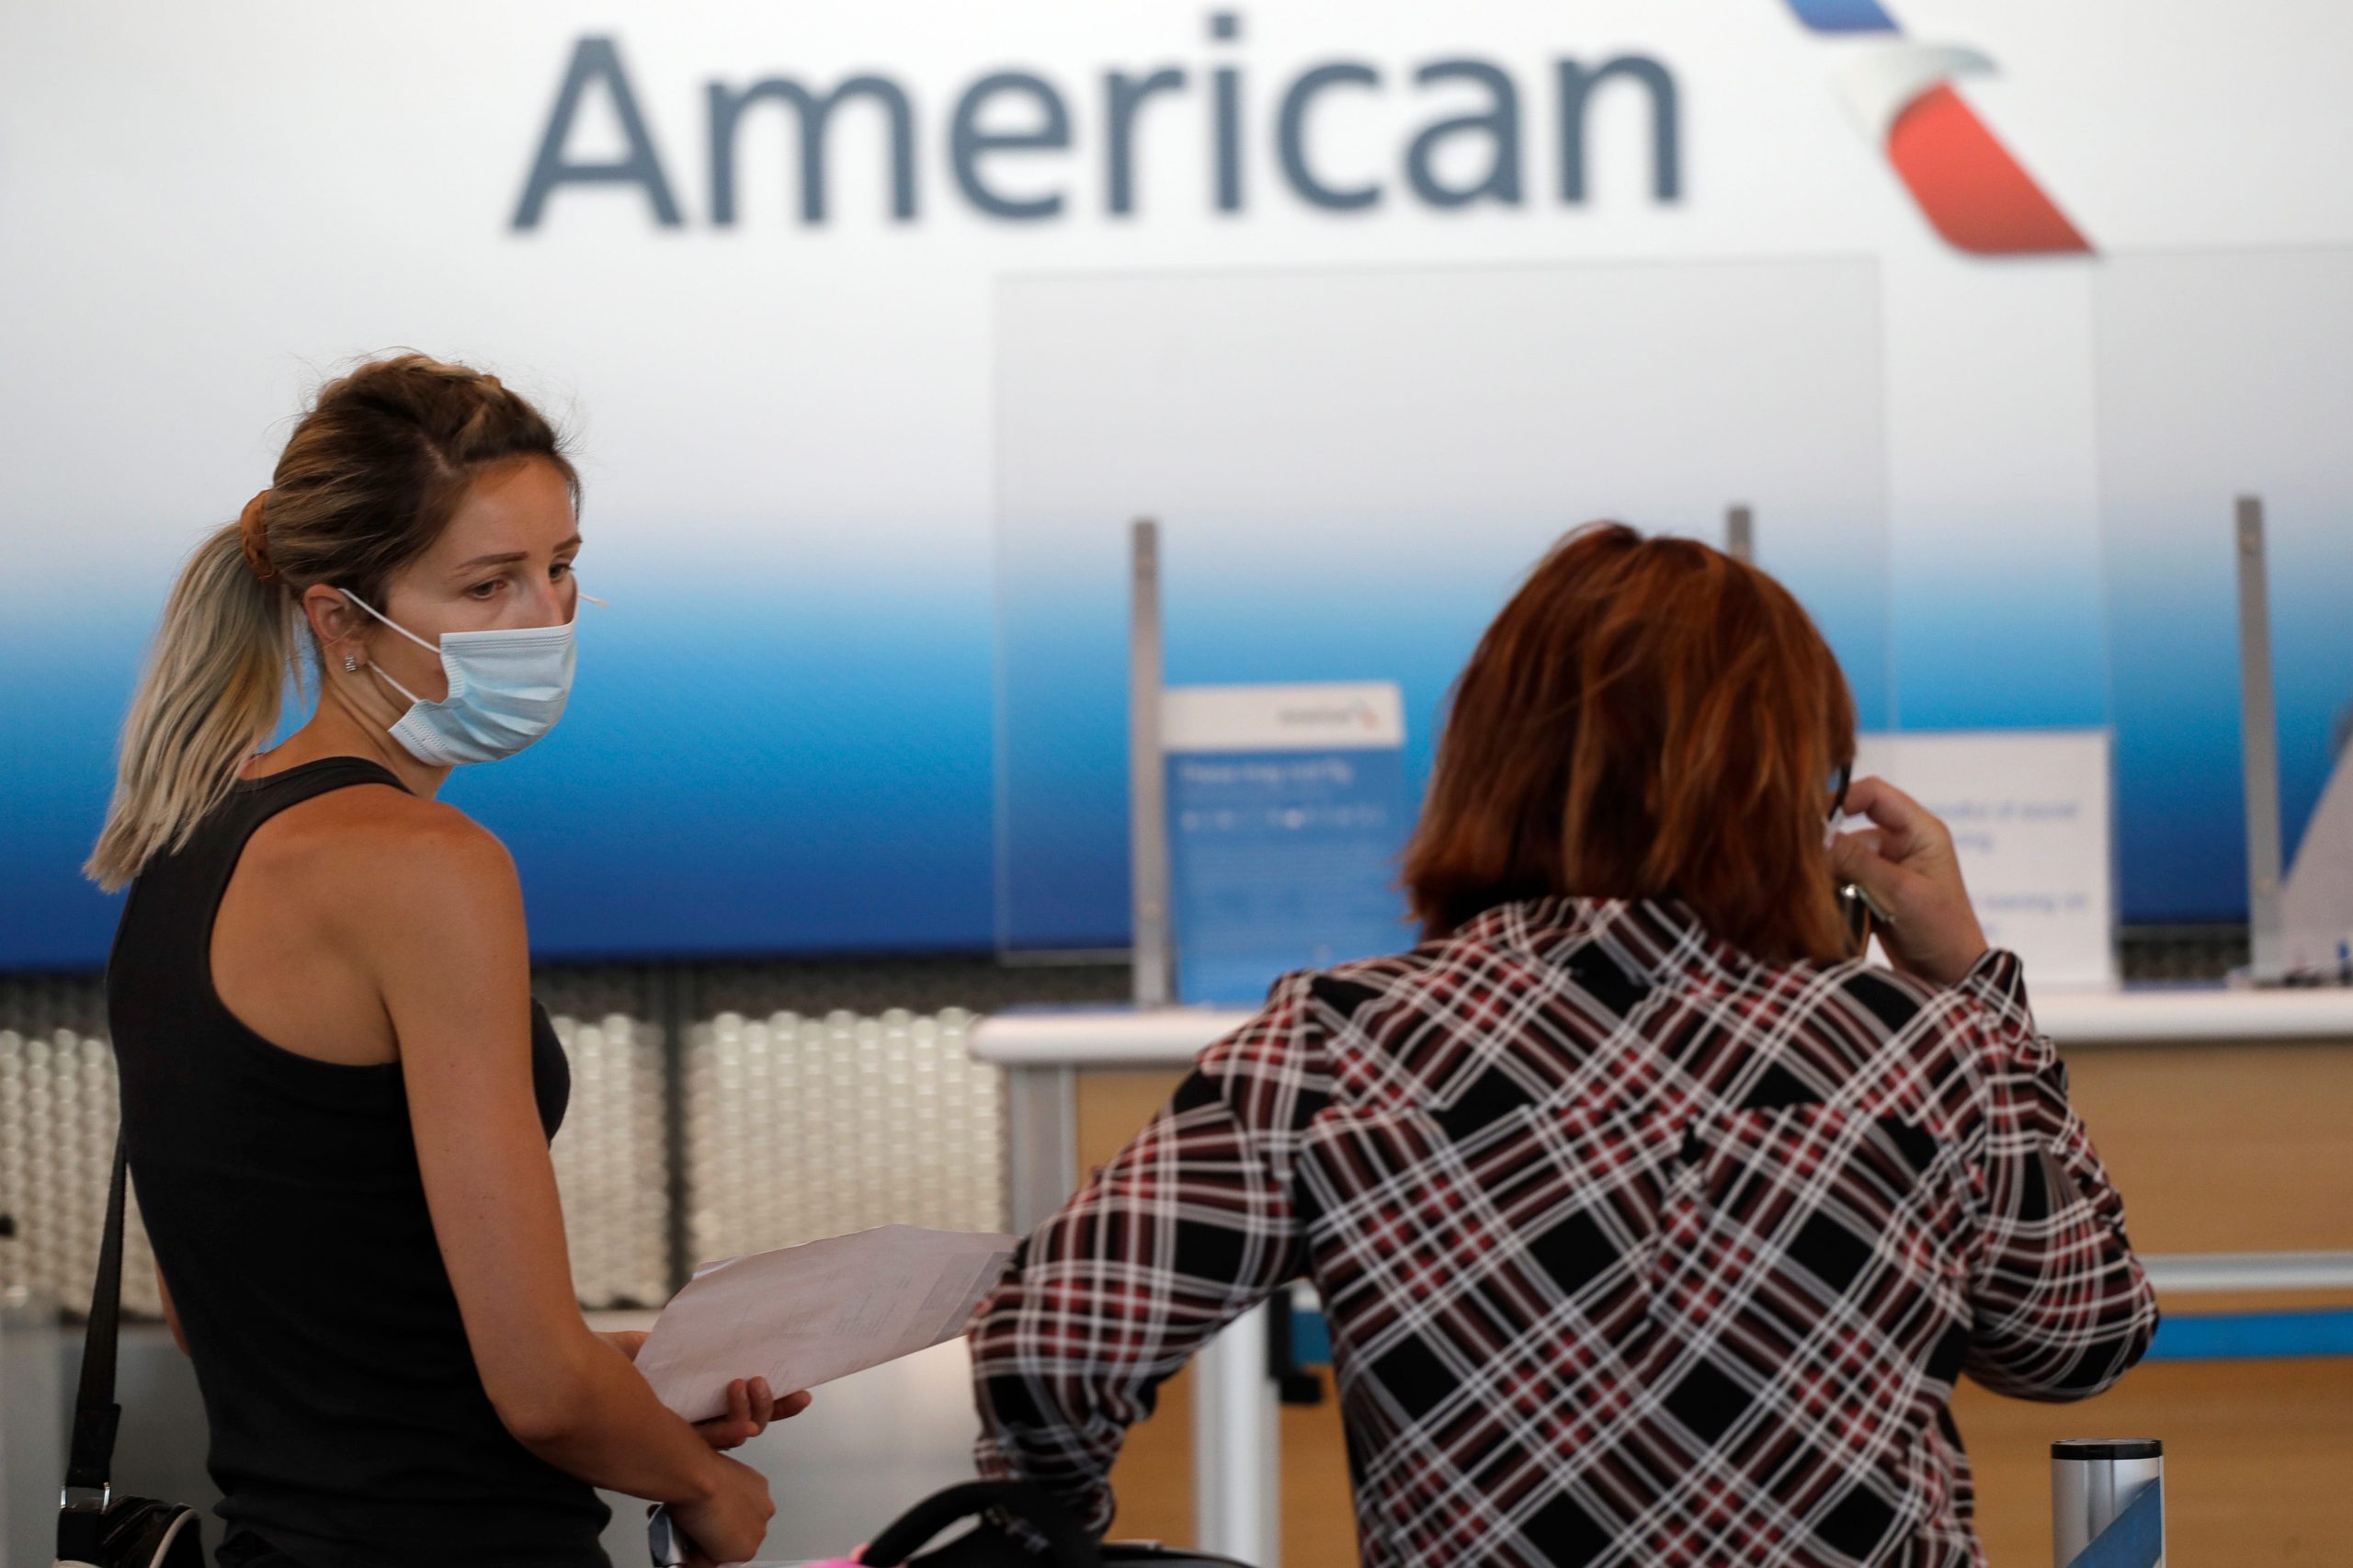 Travelers wear mask as they wait at the American Airlines ticket counter in Terminal 3 at O'Hare International Airport Tuesday, June 16, 2020, in Chicago. Beginning June 16 at American Airlines and June 18 at United Airlines, all passengers and crew members will be required to wear masks to prevent the spread of the coronavirus. (AP Photo/Nam Y. Huh)